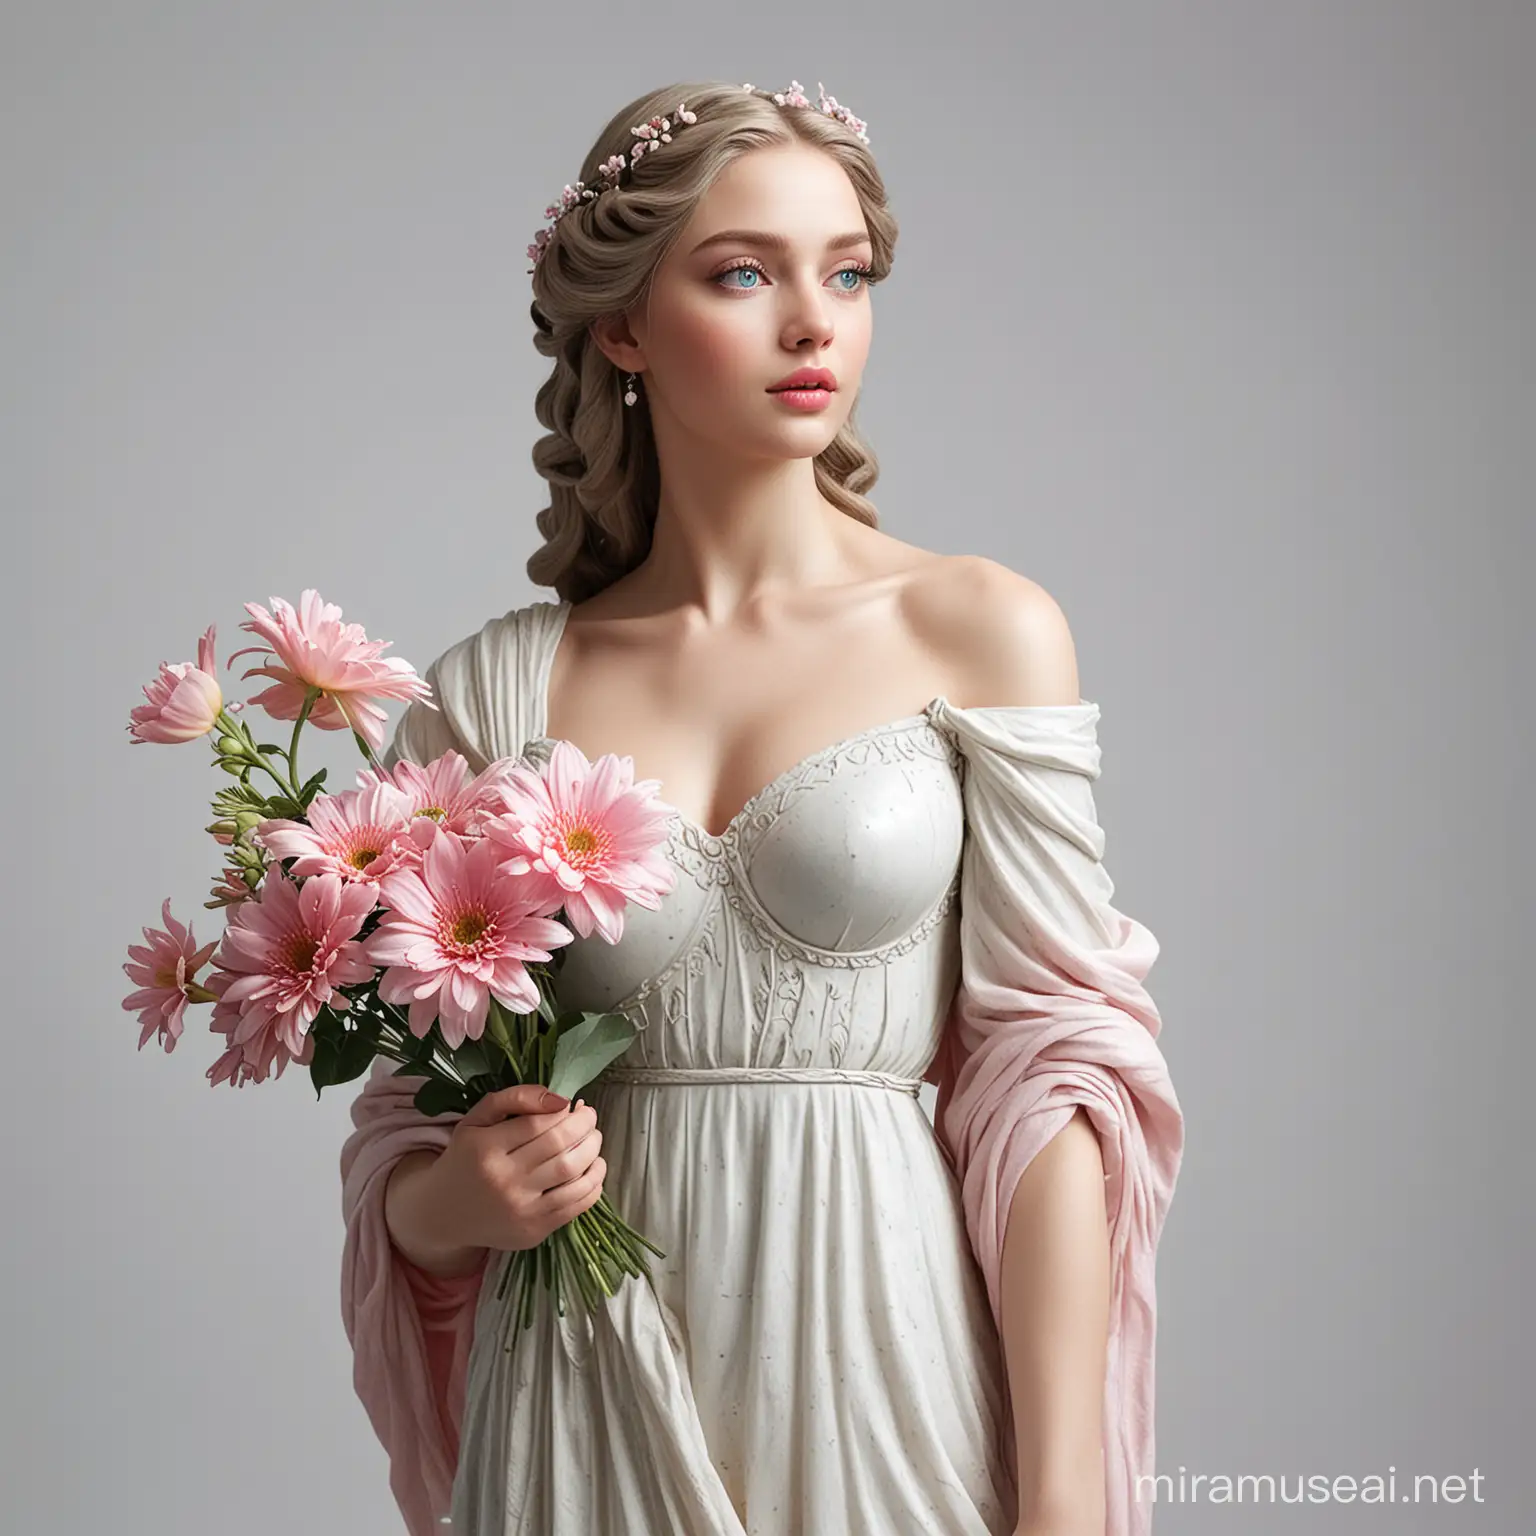 on a white background - stone statue of a beautiful woman in full height with a flower in her hands, in a long flying dress, but the face is alive, real blue eyes, long eyelashes, pink lips, skin with a blush